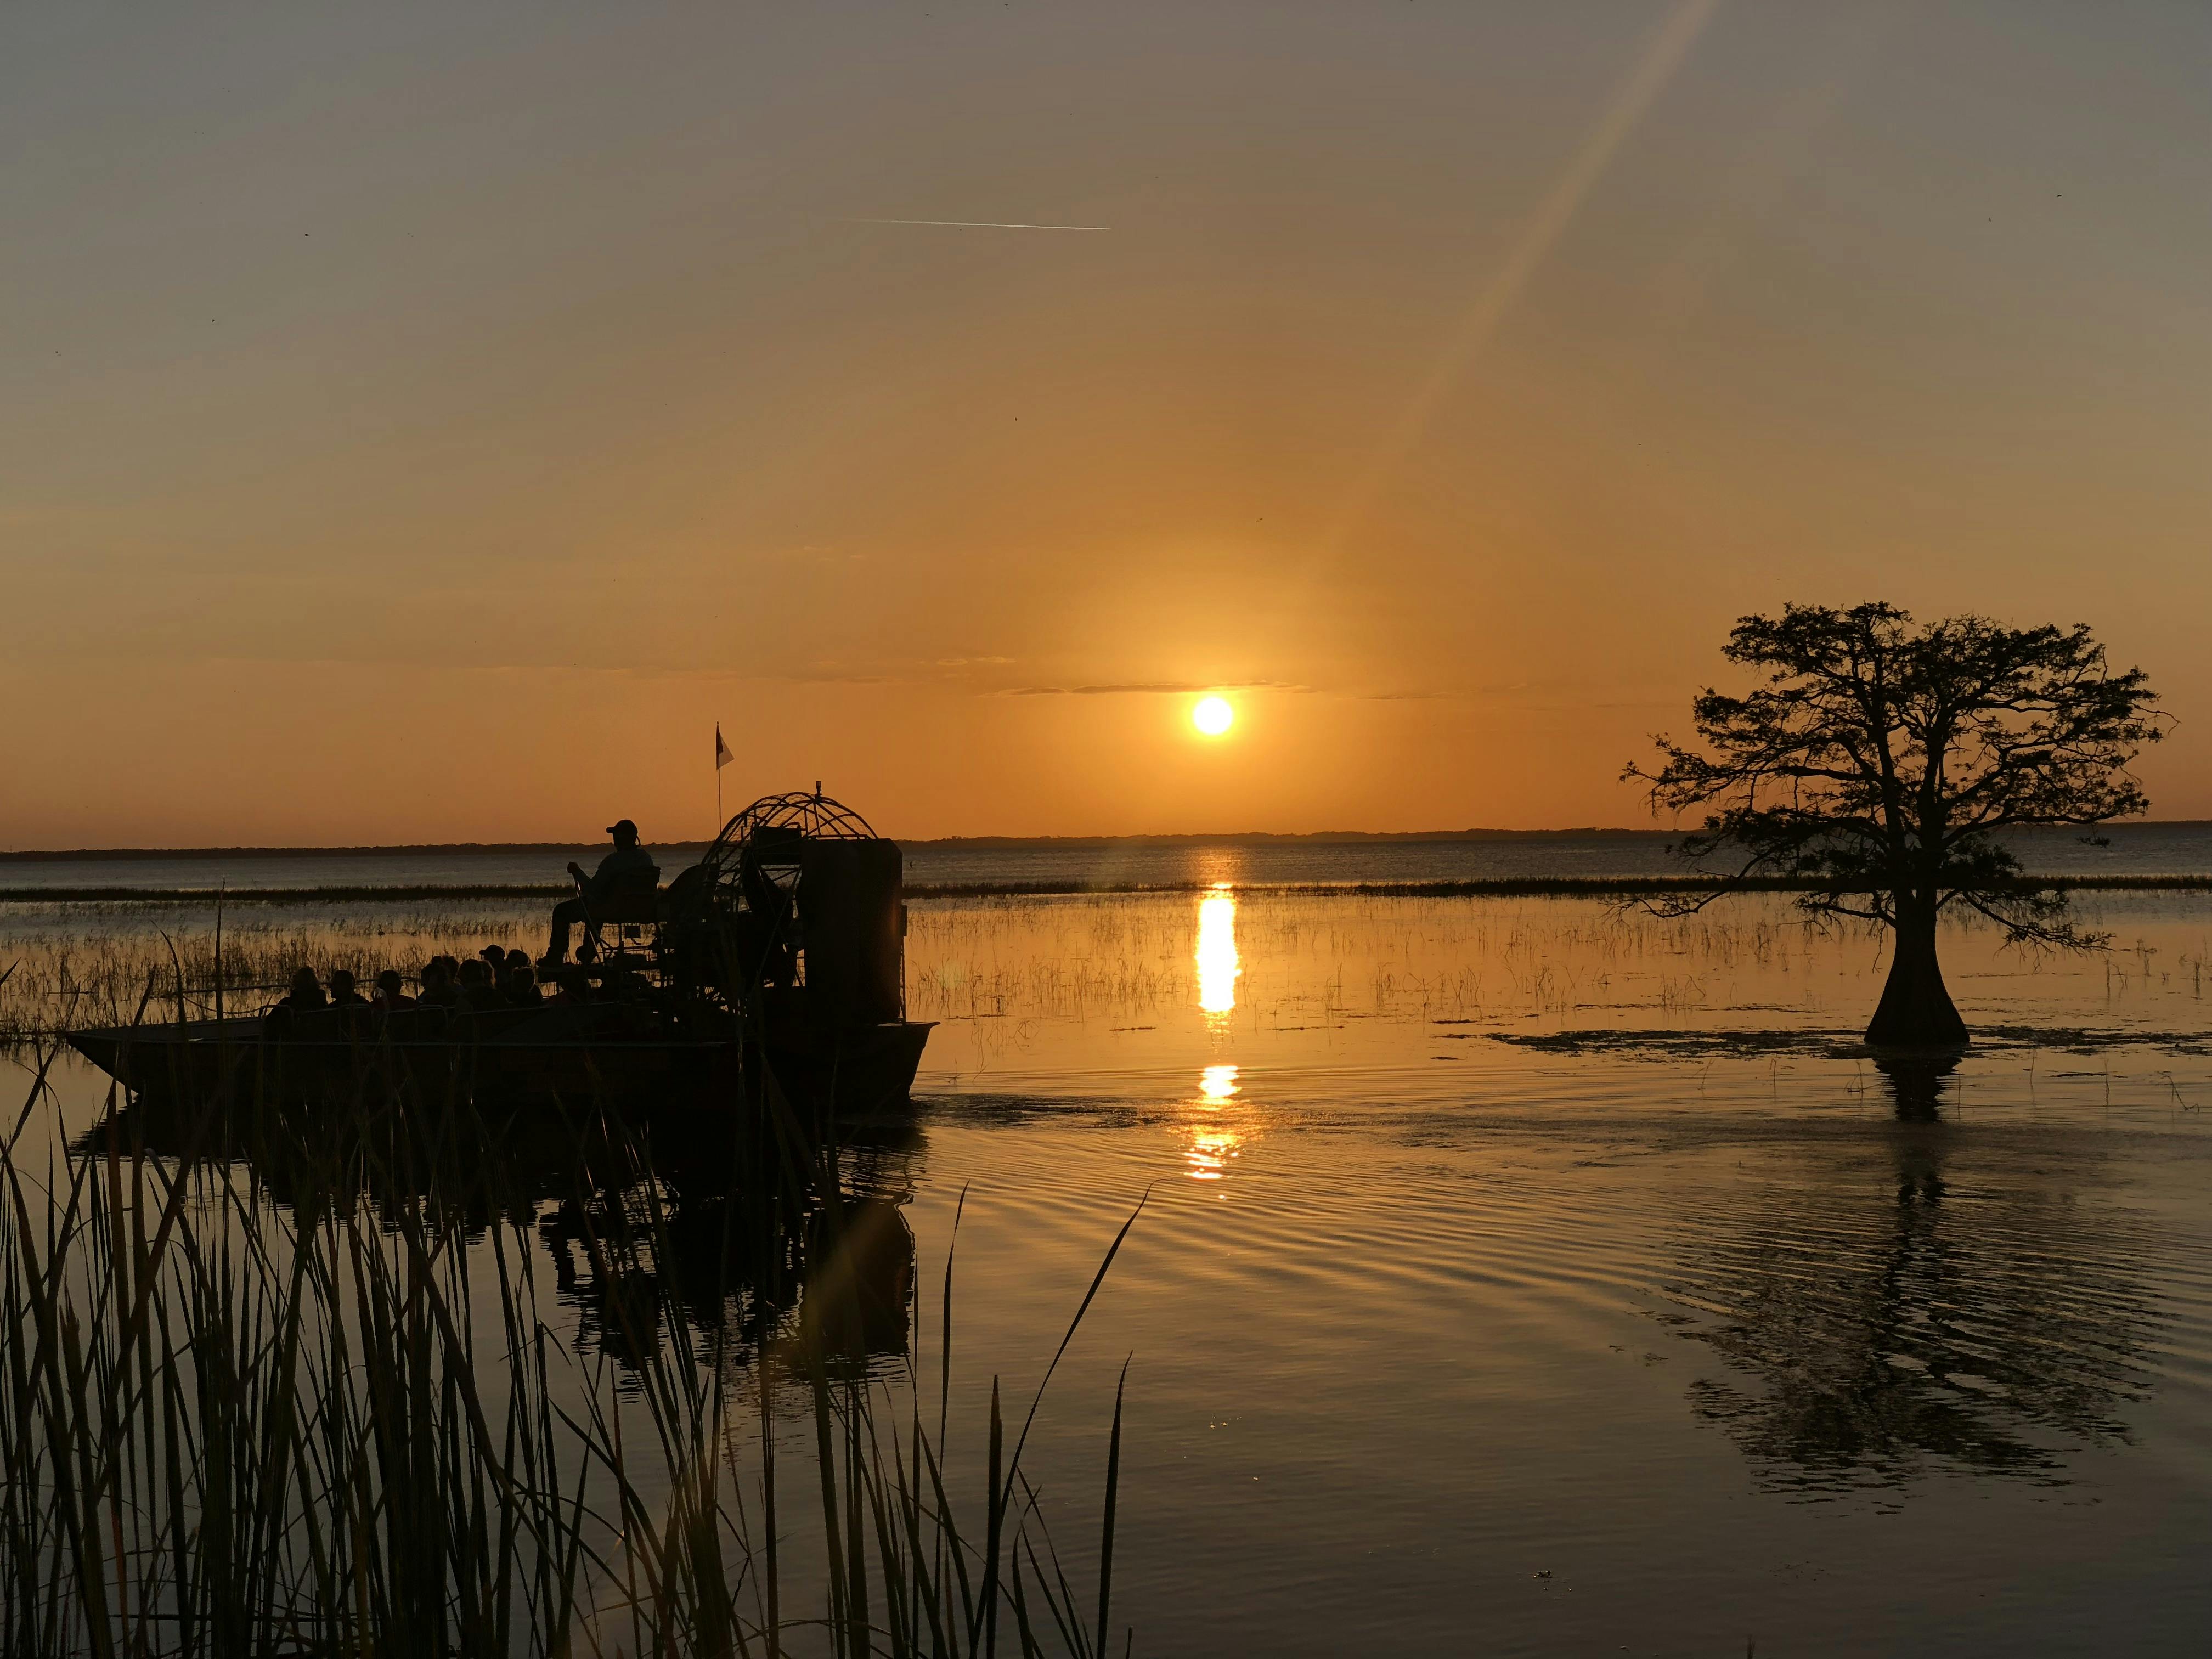 Sunset Central Florida Everglades airboat tour with park admission